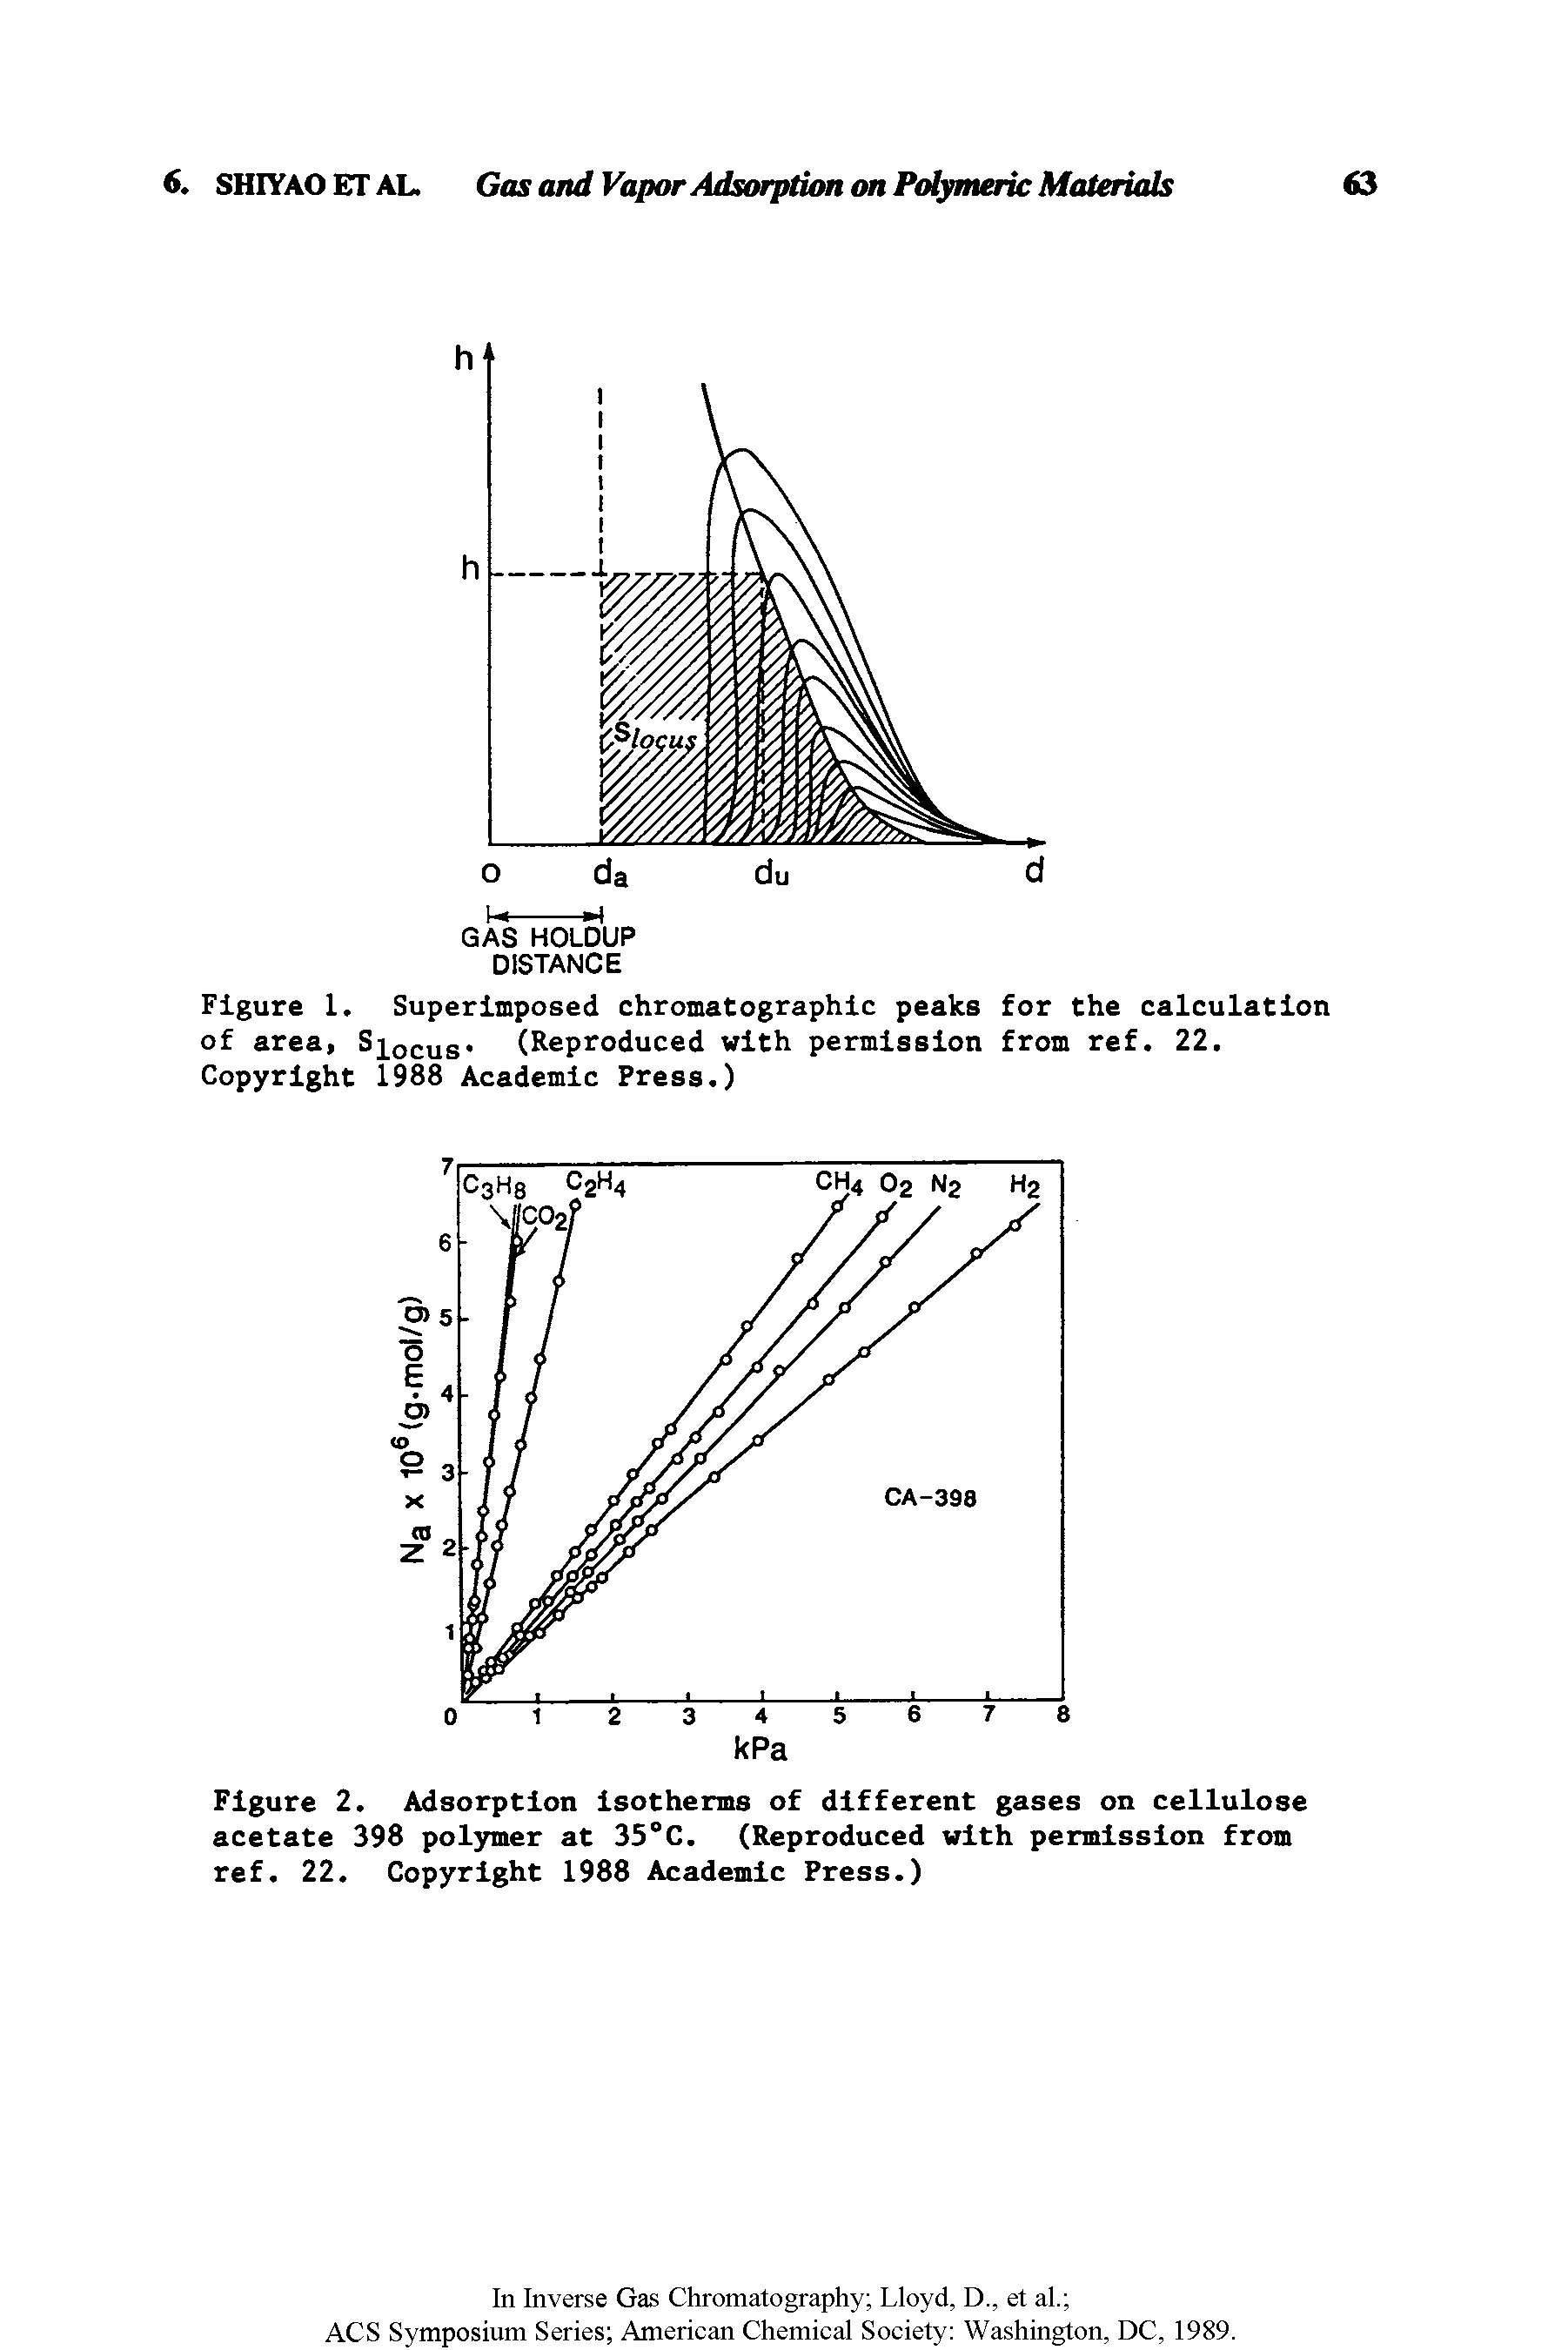 Figure 1. Superimposed chromatographic peaks for the calculation of area, Siocus. (Reproduced with permission from ref. 22. Copyright 1988 Academic Press.)...